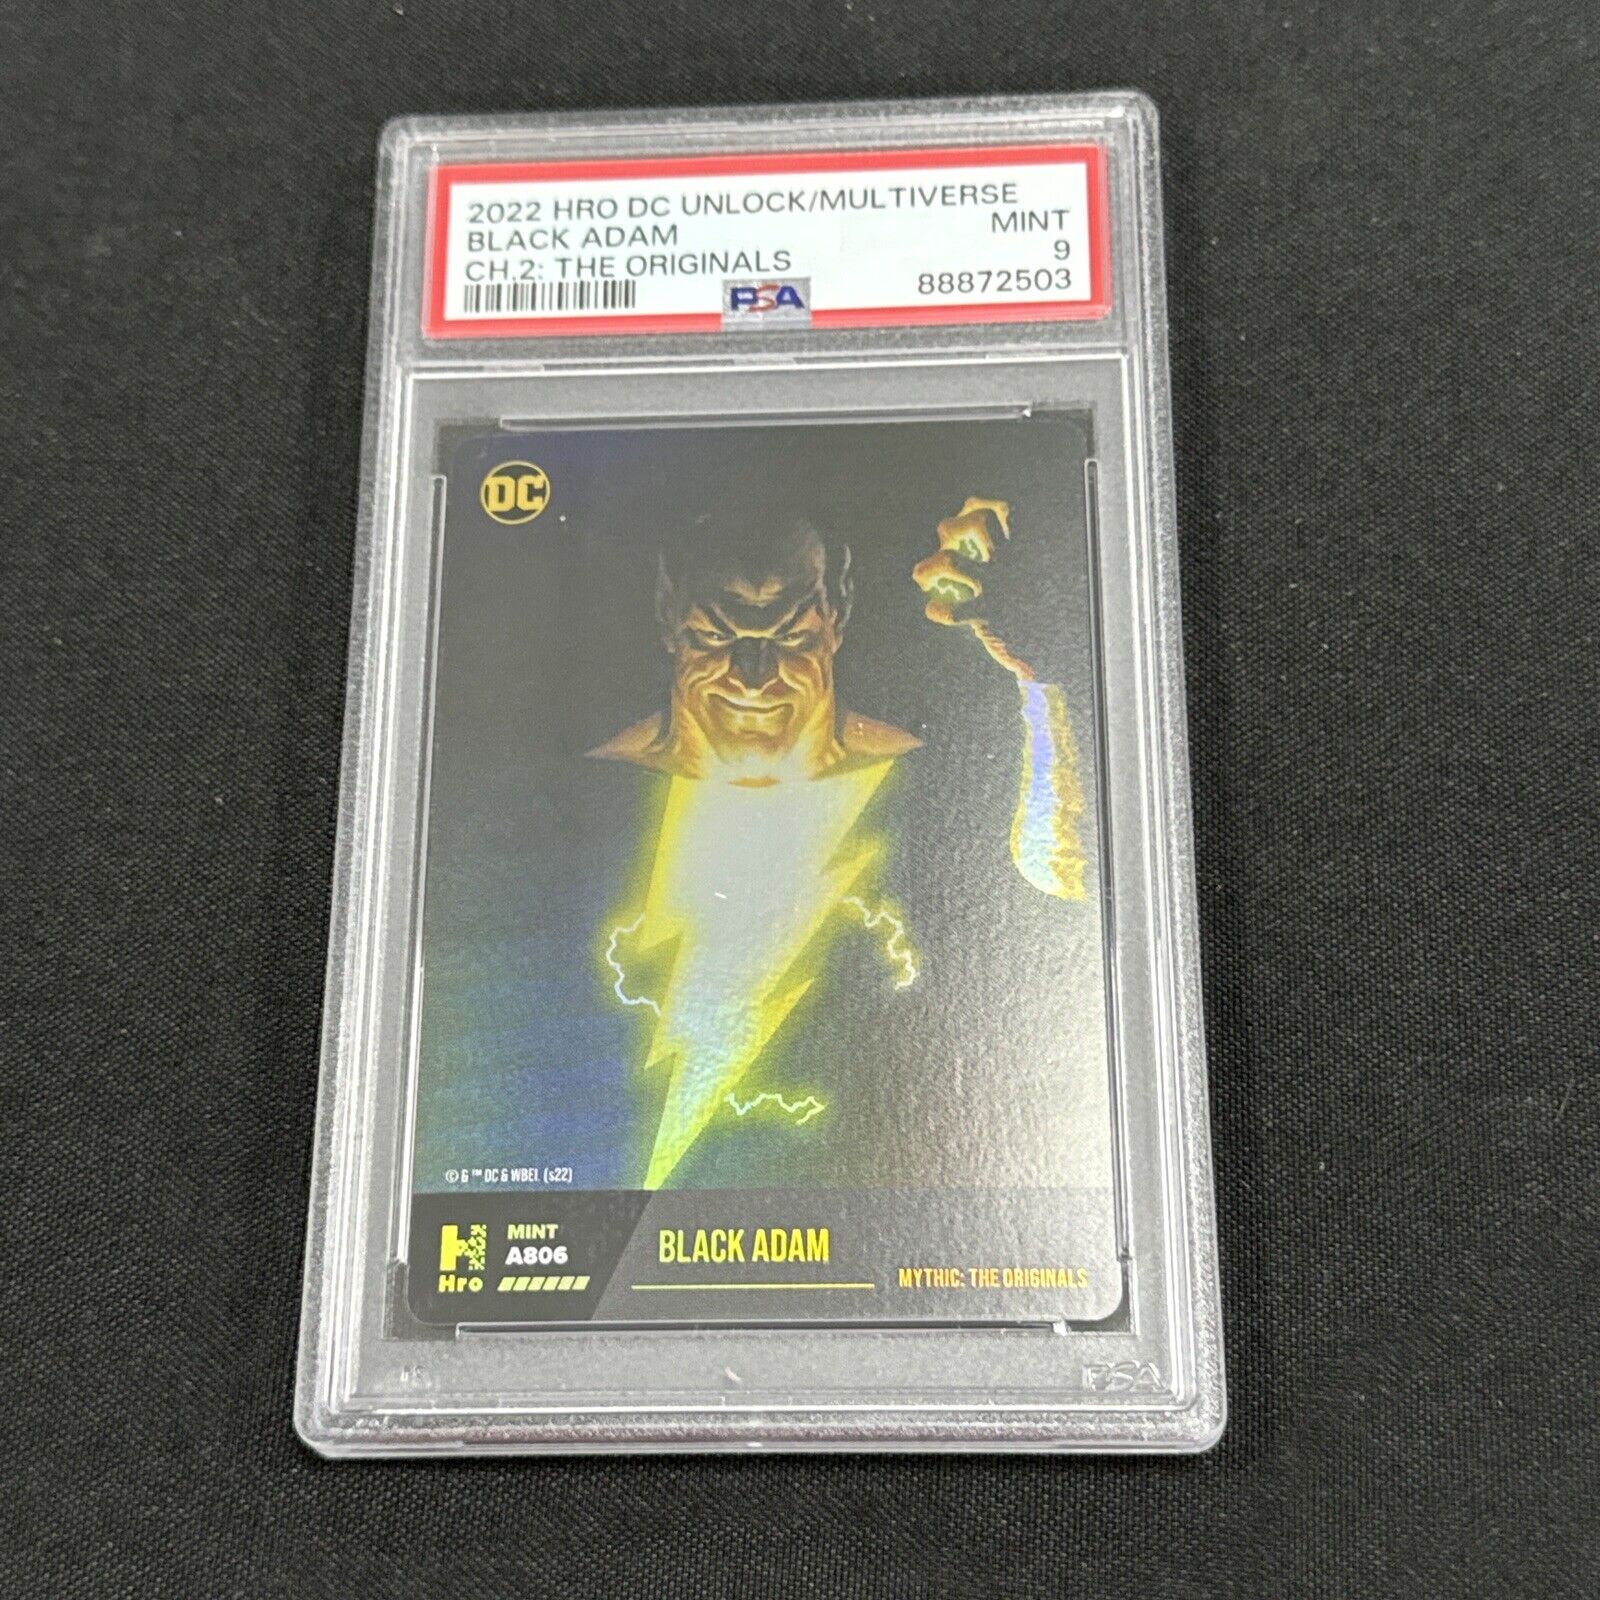 2022 DC Cards PSA 9 Mint Black Adam Mythic The Originals Physical Only